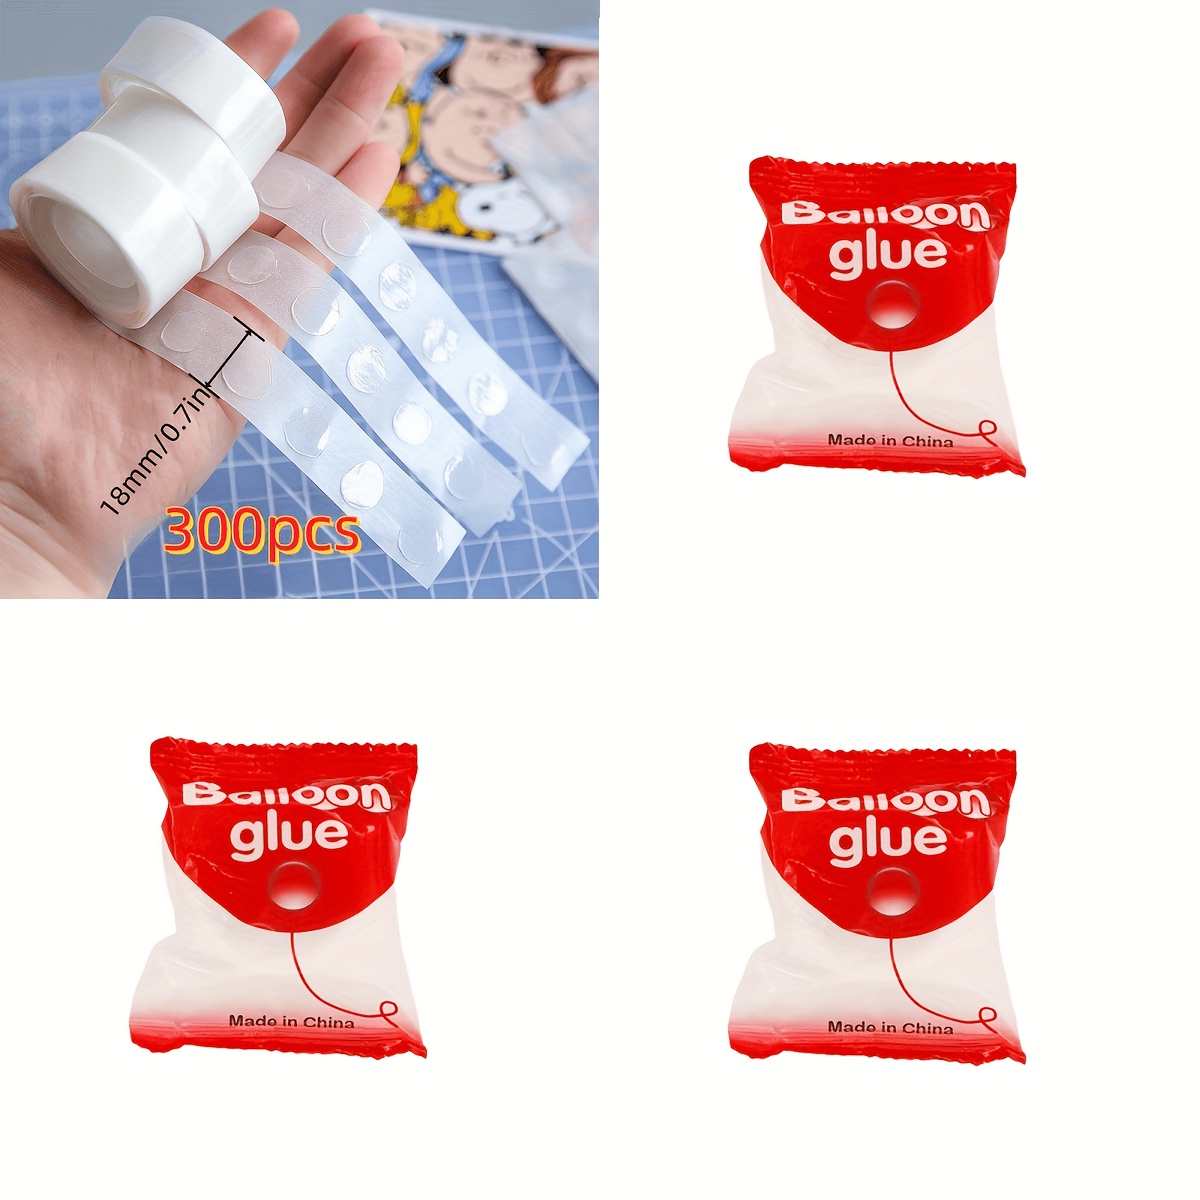 600 Pcs Double-sided Dispensing Adhesive Dots Wall Sticky for